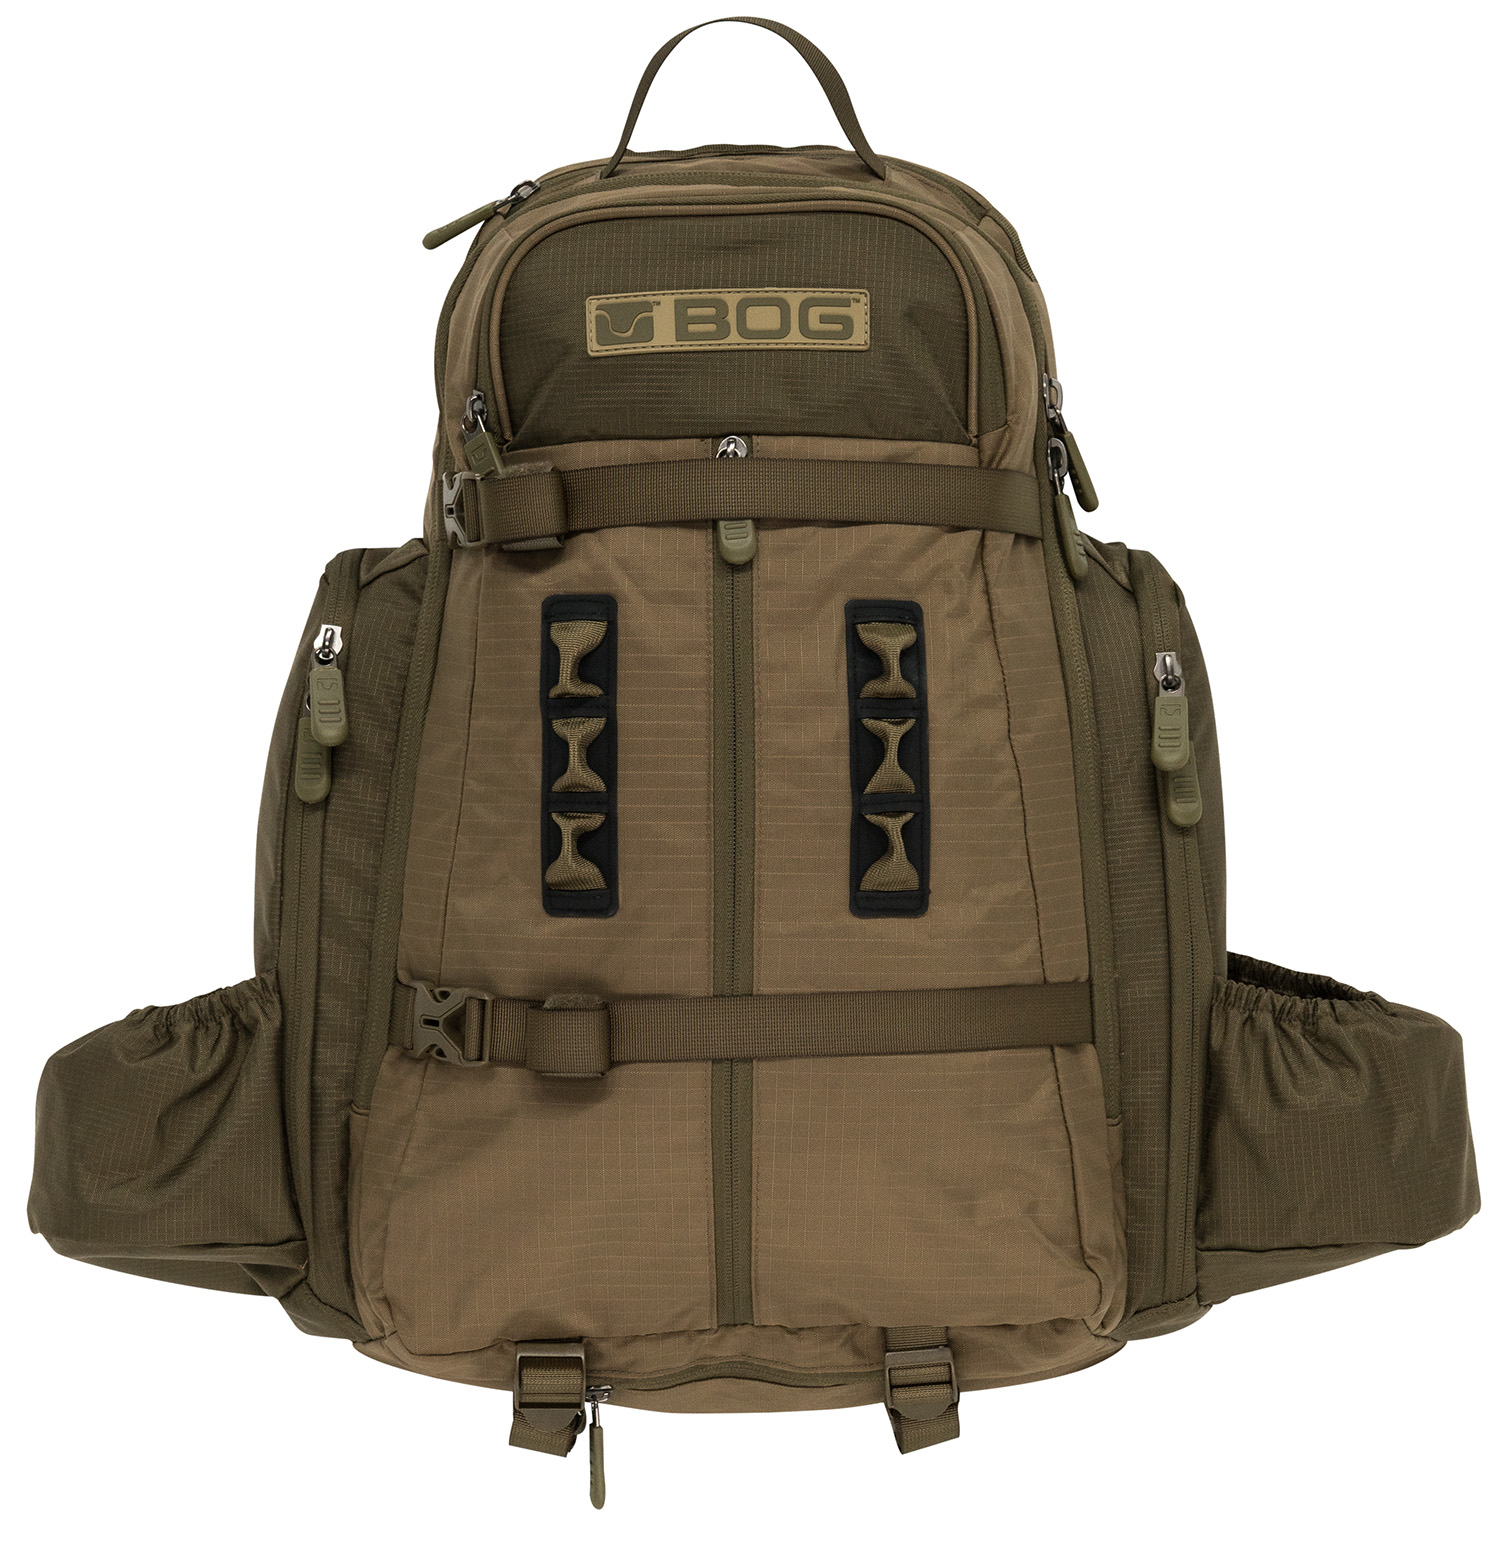 Bog-Pod 1159182 Kinetic Hunting Day Pack Lightweight made of Tear Resistant Nylon with OD Green Finish, YKK Zipper, Rain Cover & Removeable Gun/Bow Boot